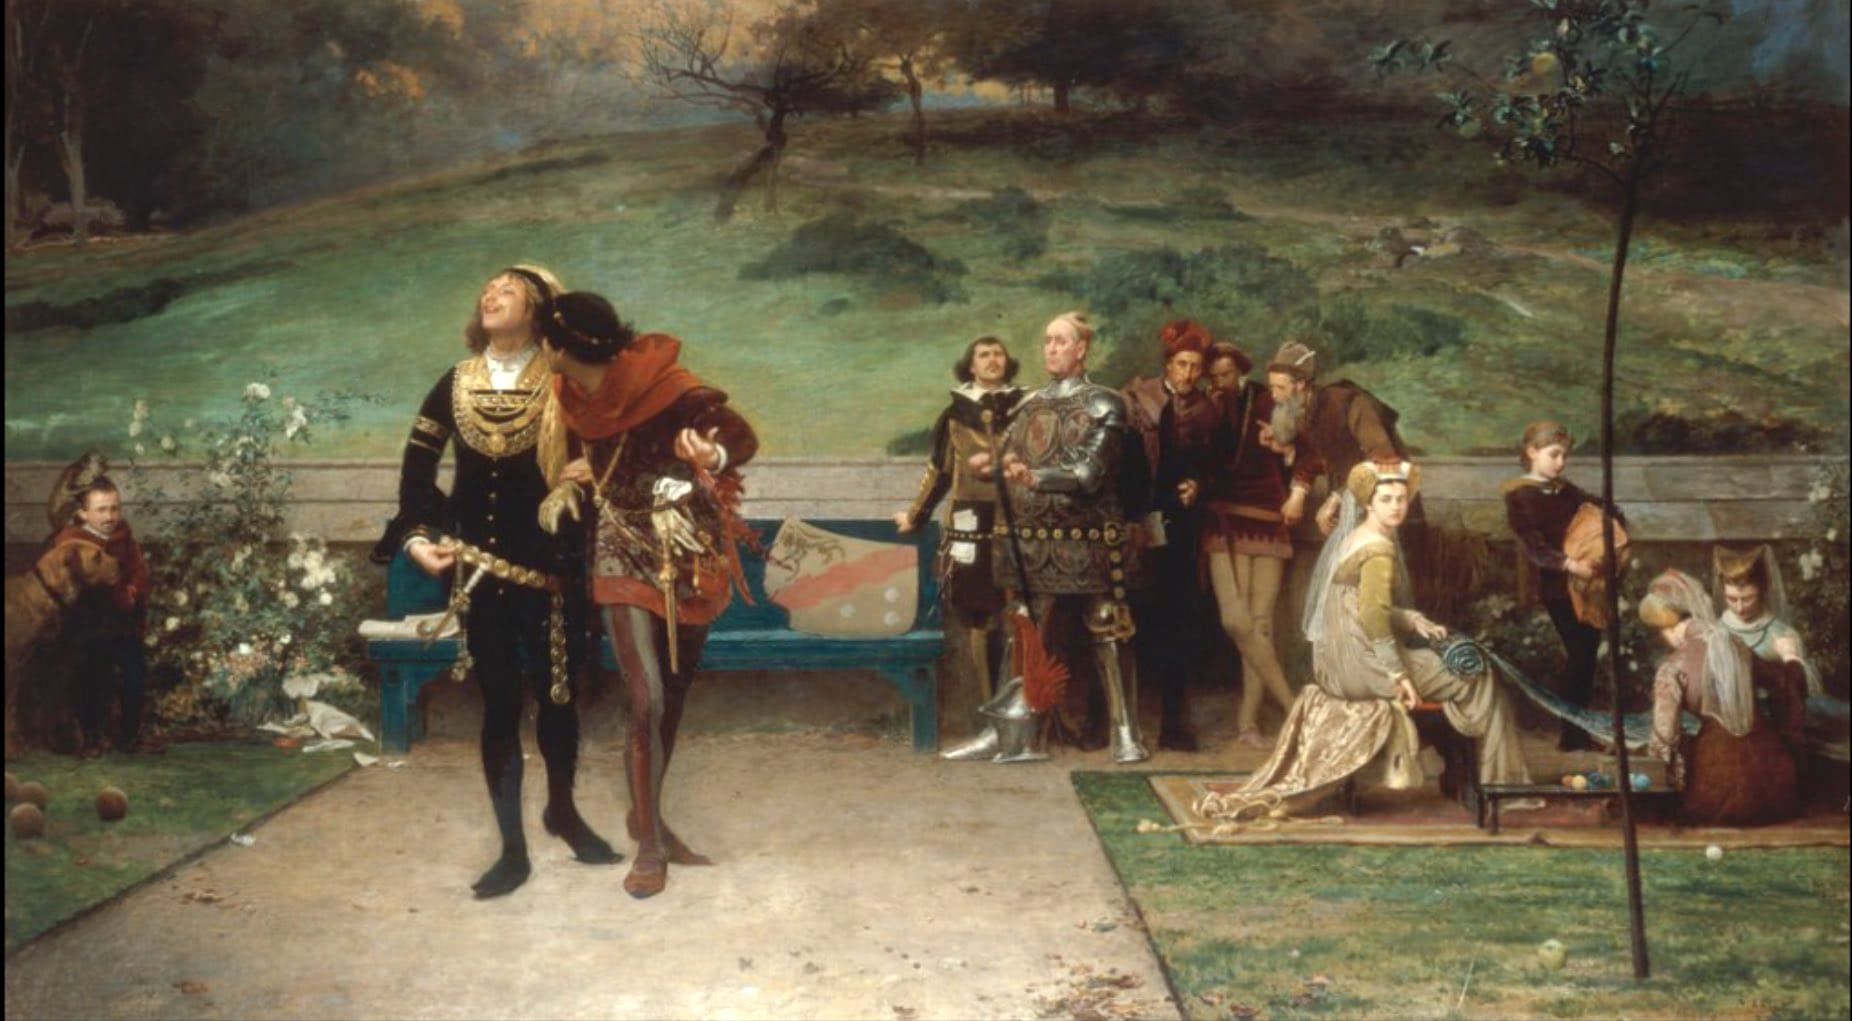 Two men flirting in front of a royal court. 